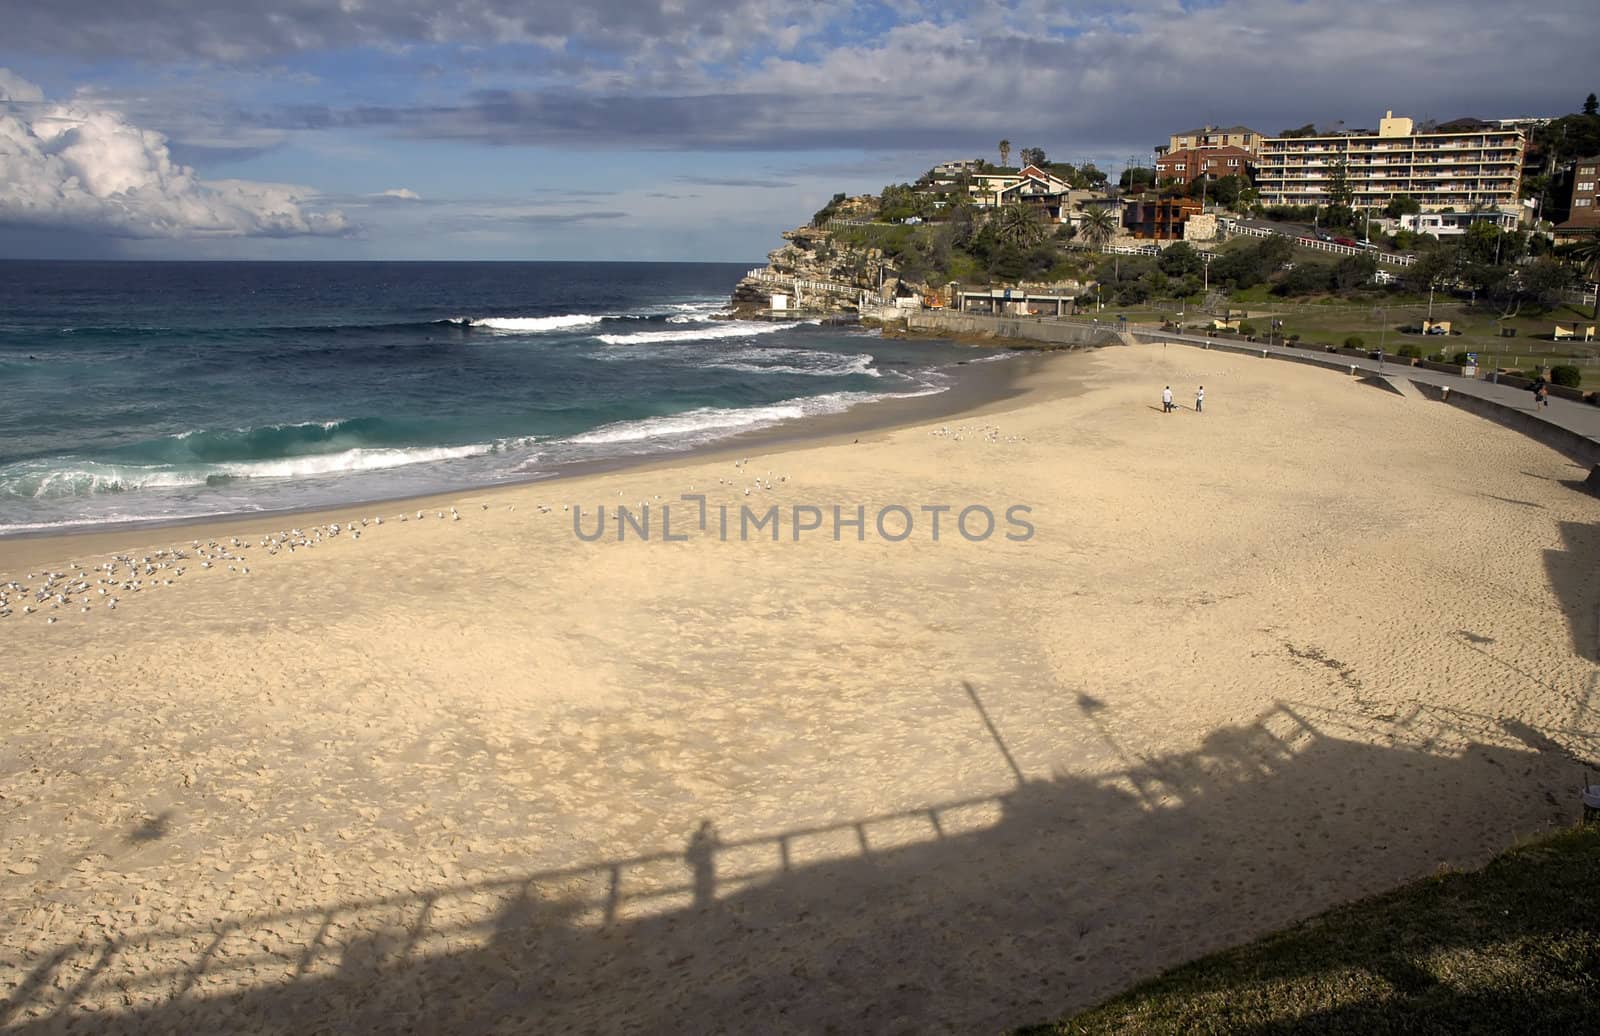 Bronte beach in Sydney, Bronte Beach is part of Nelson Bay, surrounded by Bronte Park.